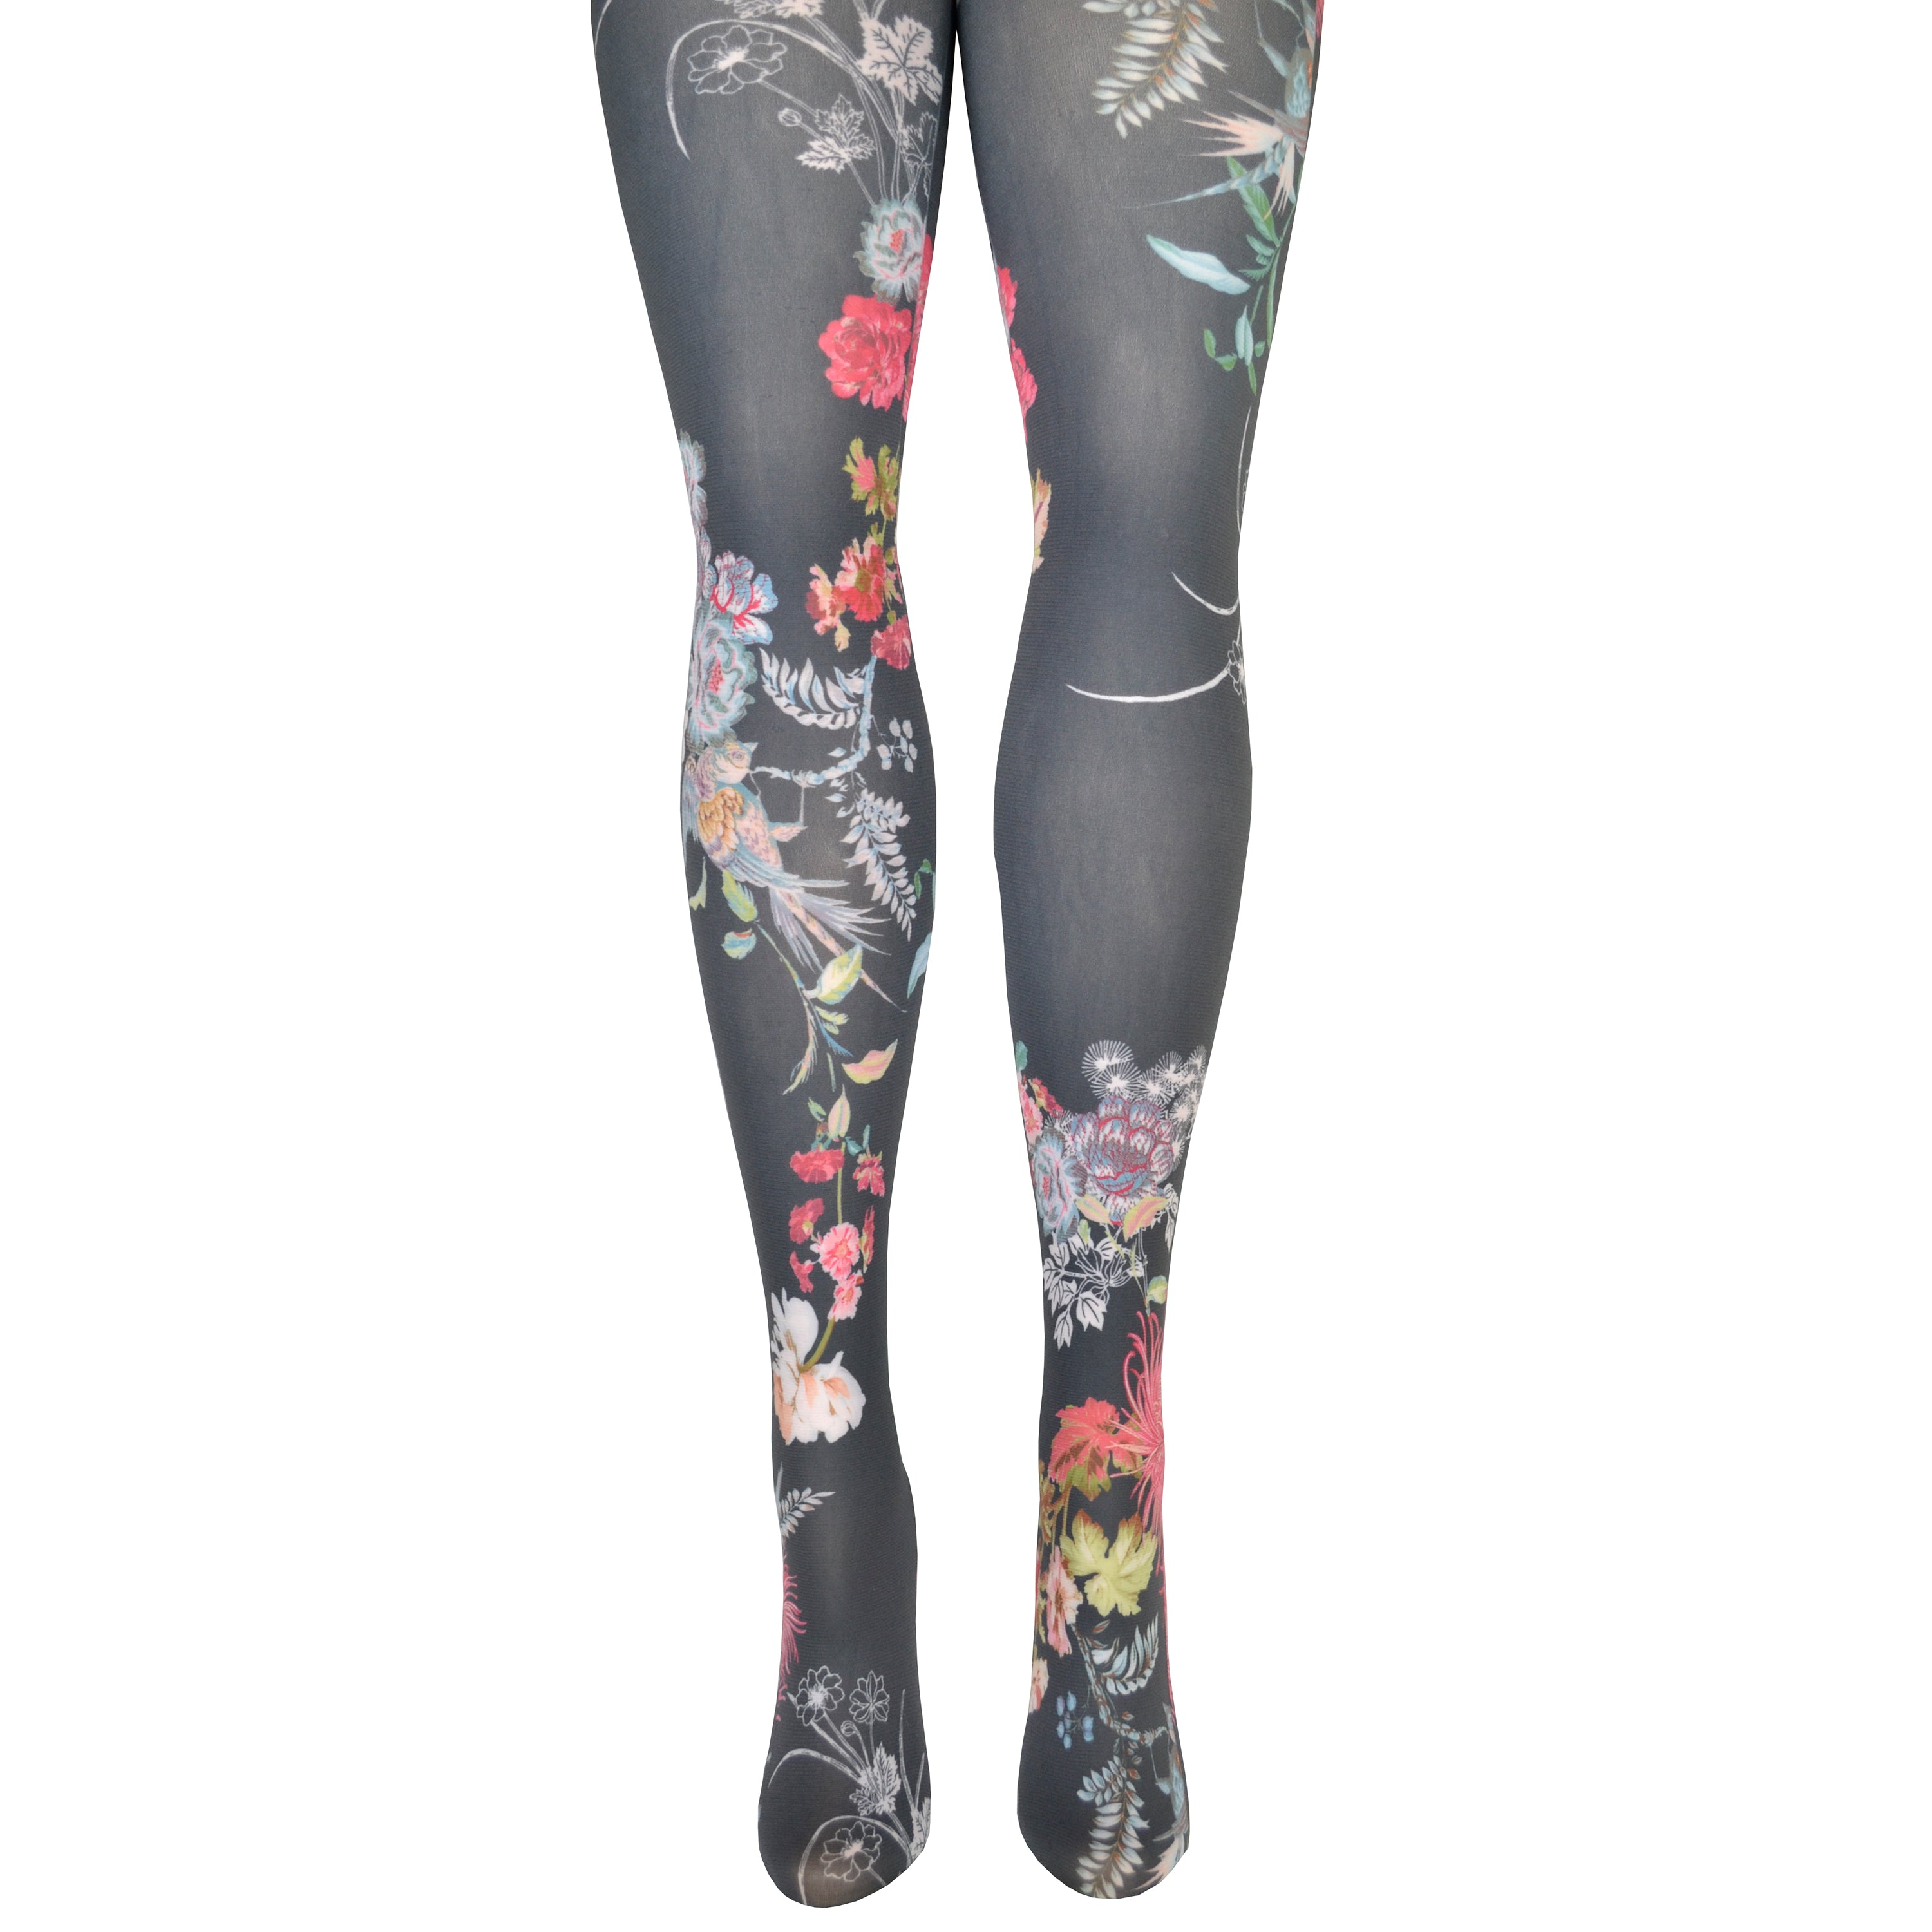 Shown on leg forms, a pair of grey tights with an all over pink, blue, green, and yellow floral design. Each leg of the tight features a different orientation of the floral design. 